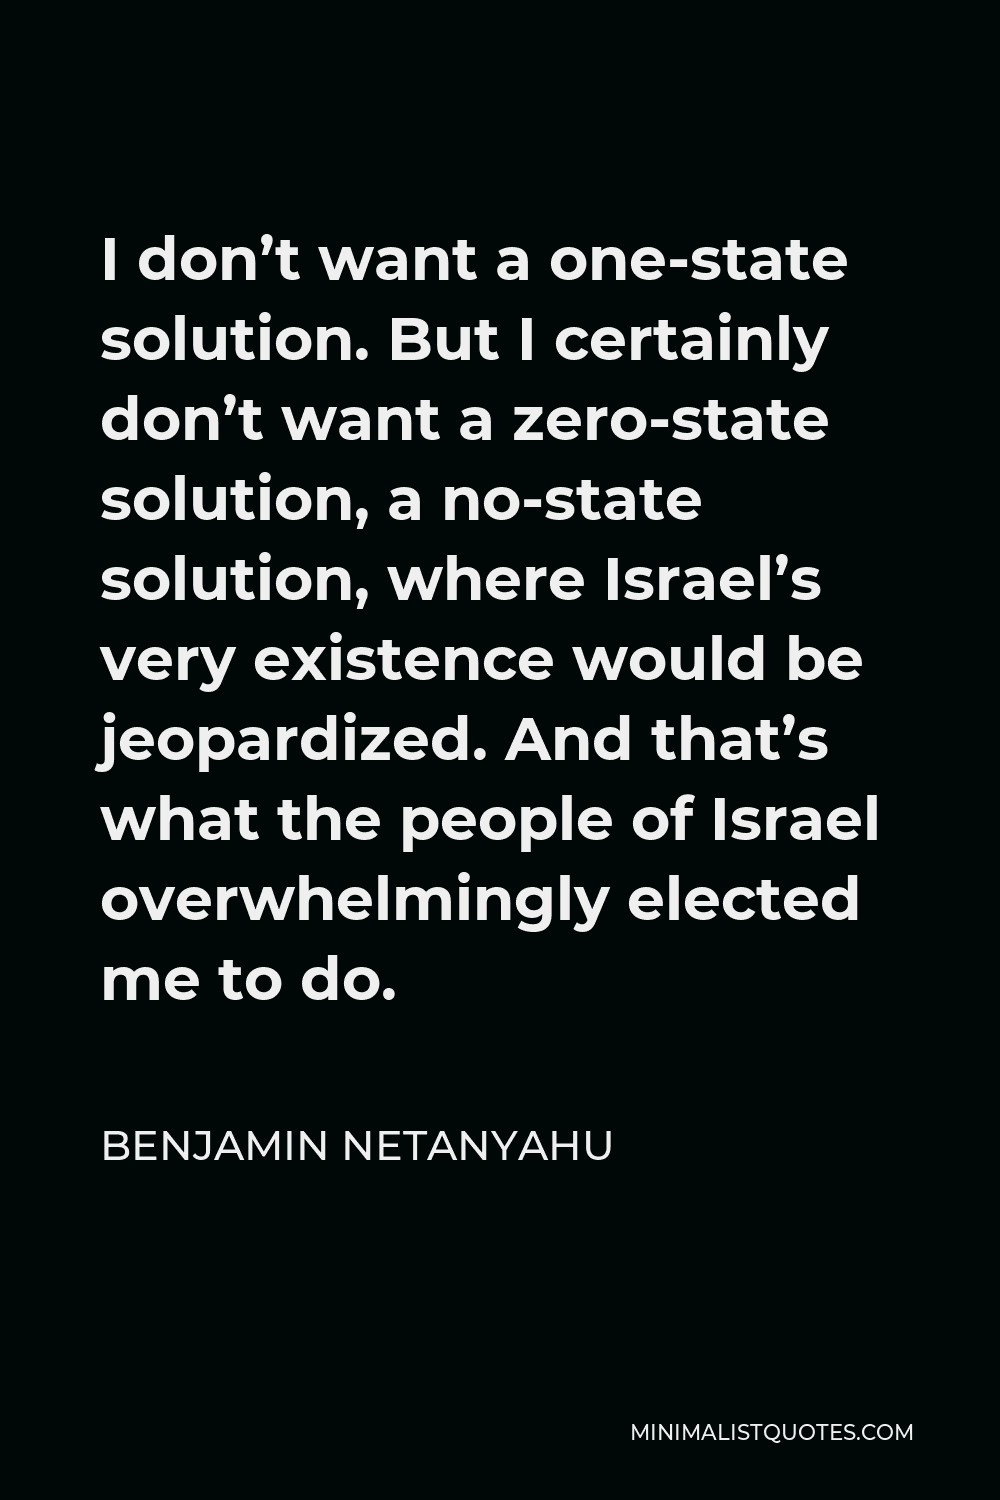 Benjamin Netanyahu Quote - I don’t want a one-state solution. But I certainly don’t want a zero-state solution, a no-state solution, where Israel’s very existence would be jeopardized. And that’s what the people of Israel overwhelmingly elected me to do.